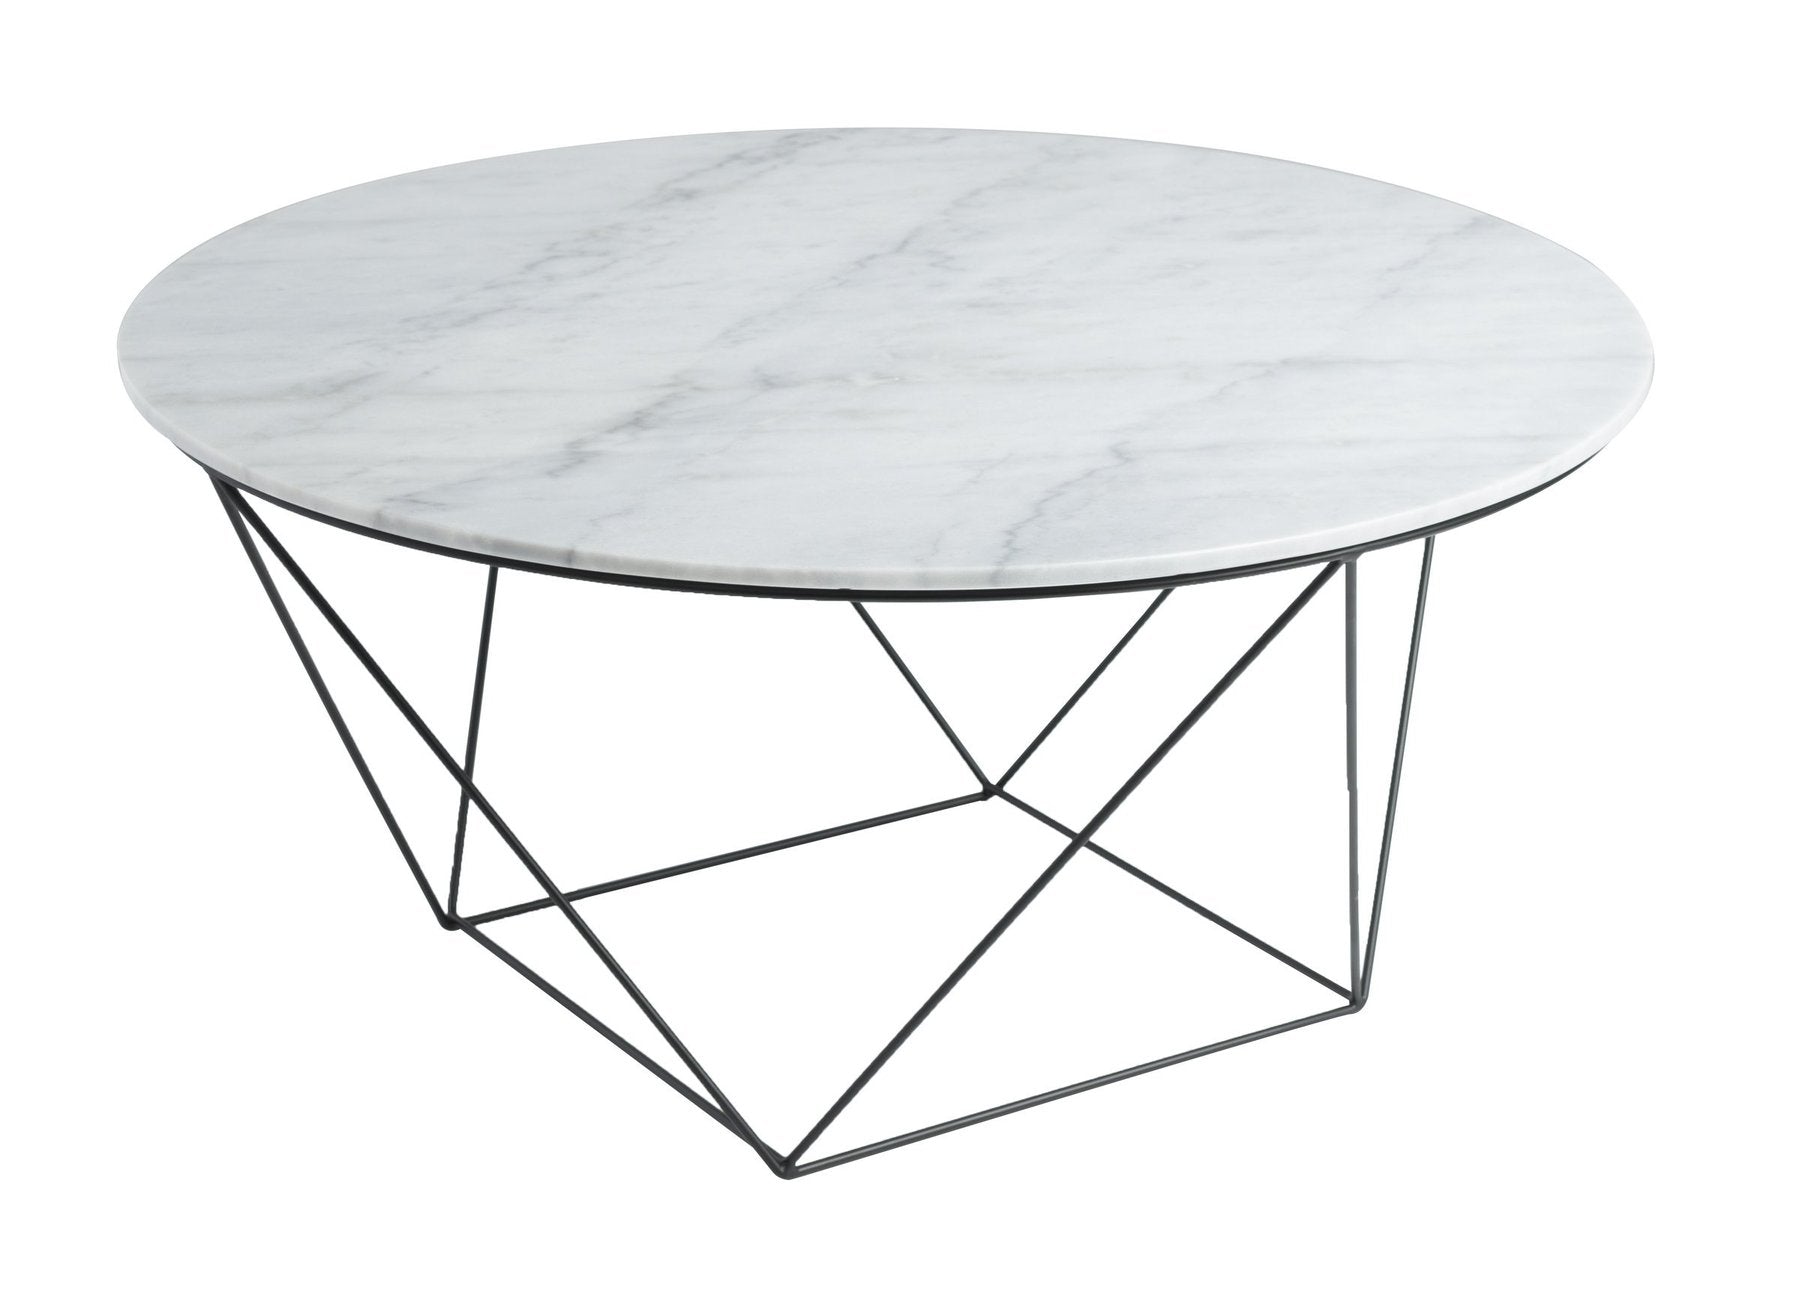 Valenica Round Coffee Table